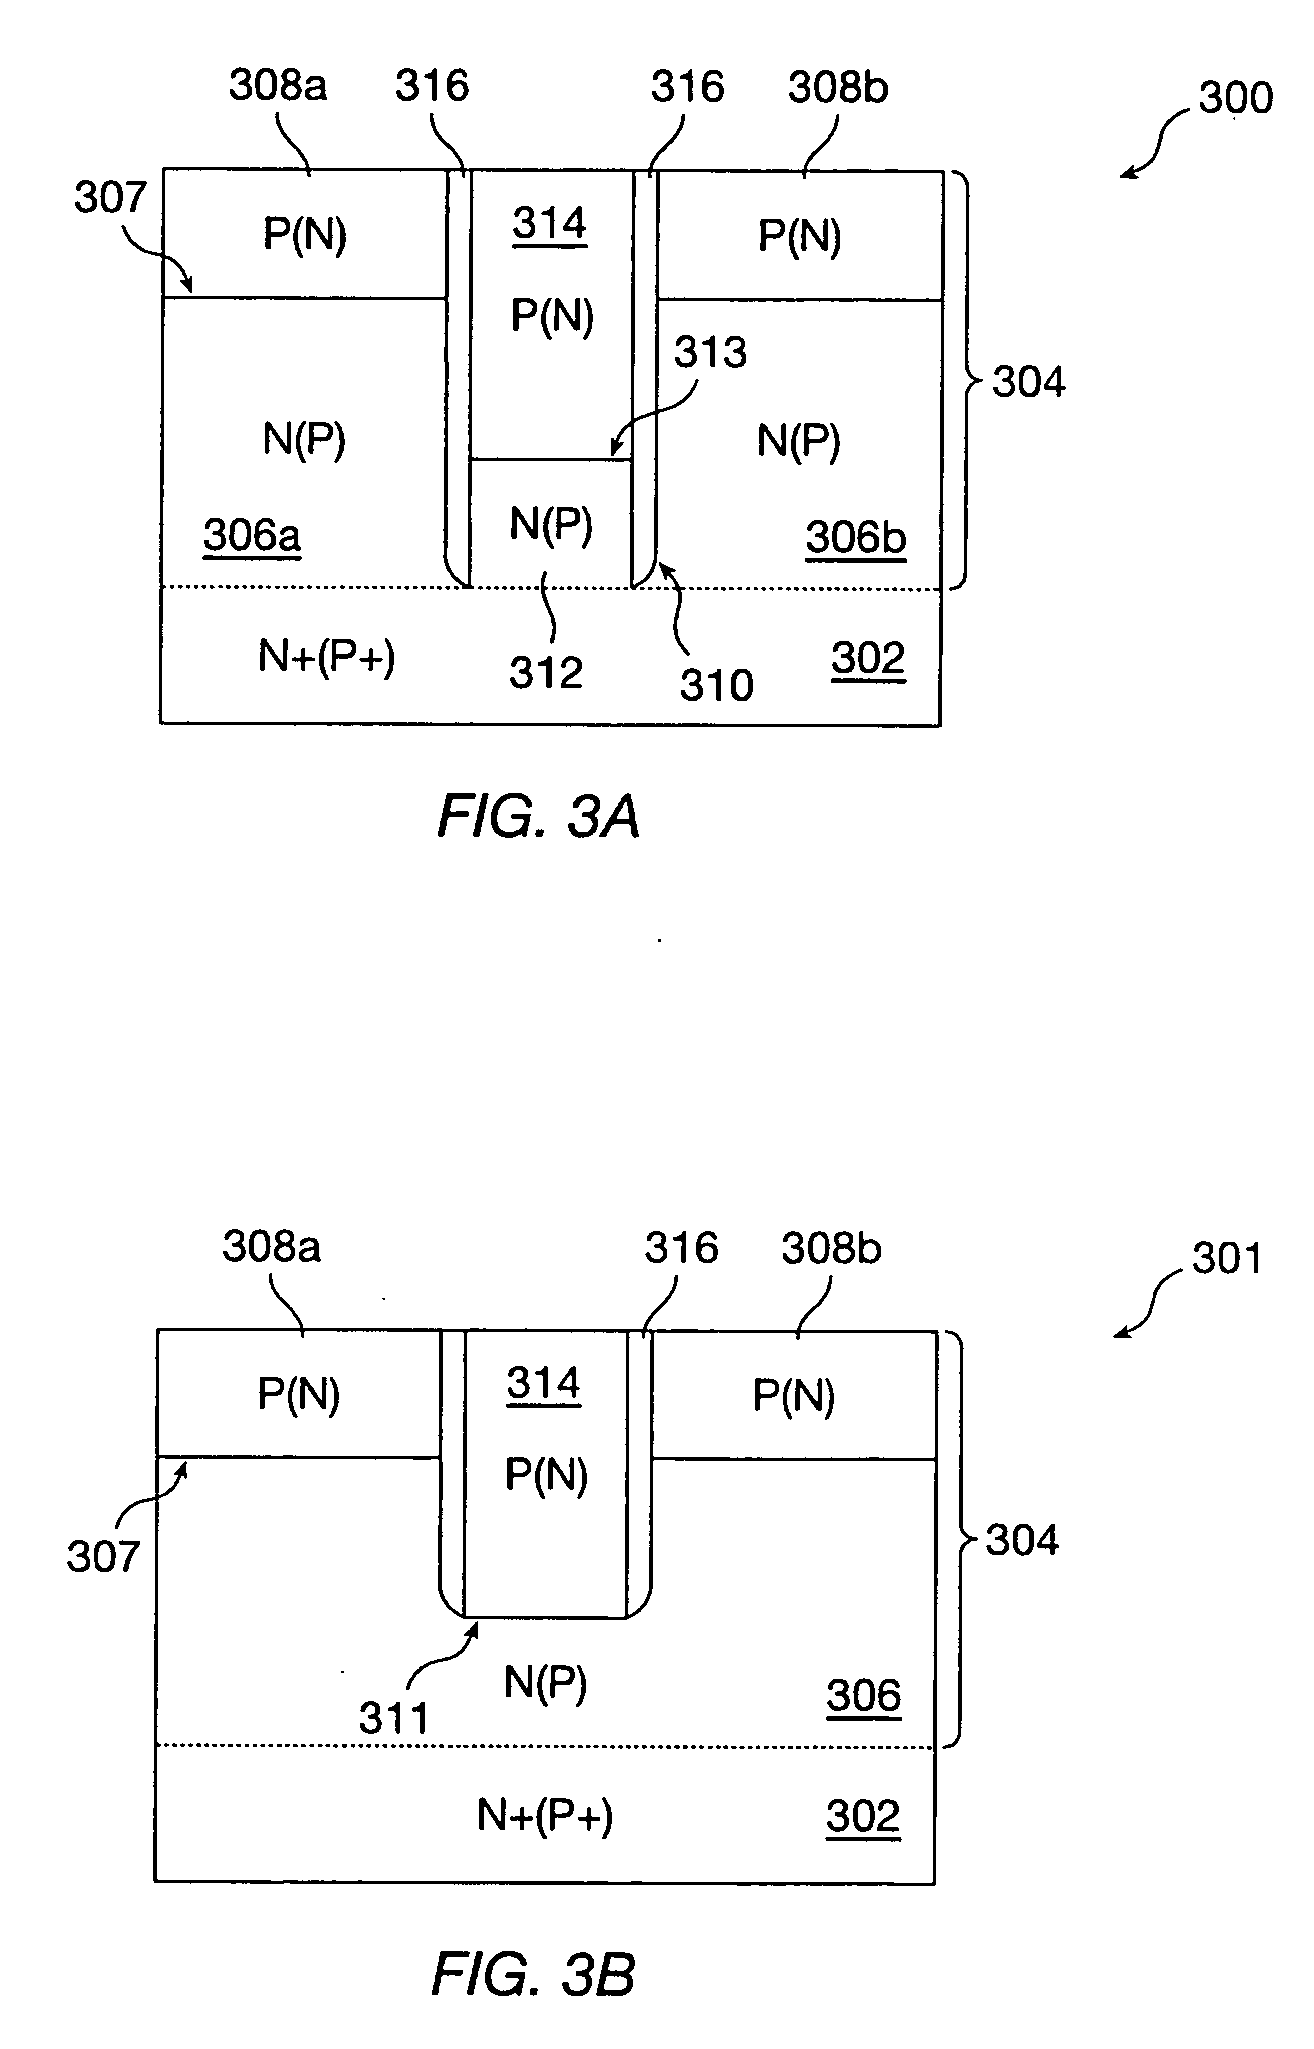 Method of forming a trench structure having one or more diodes embedded therein adjacent a PN junction